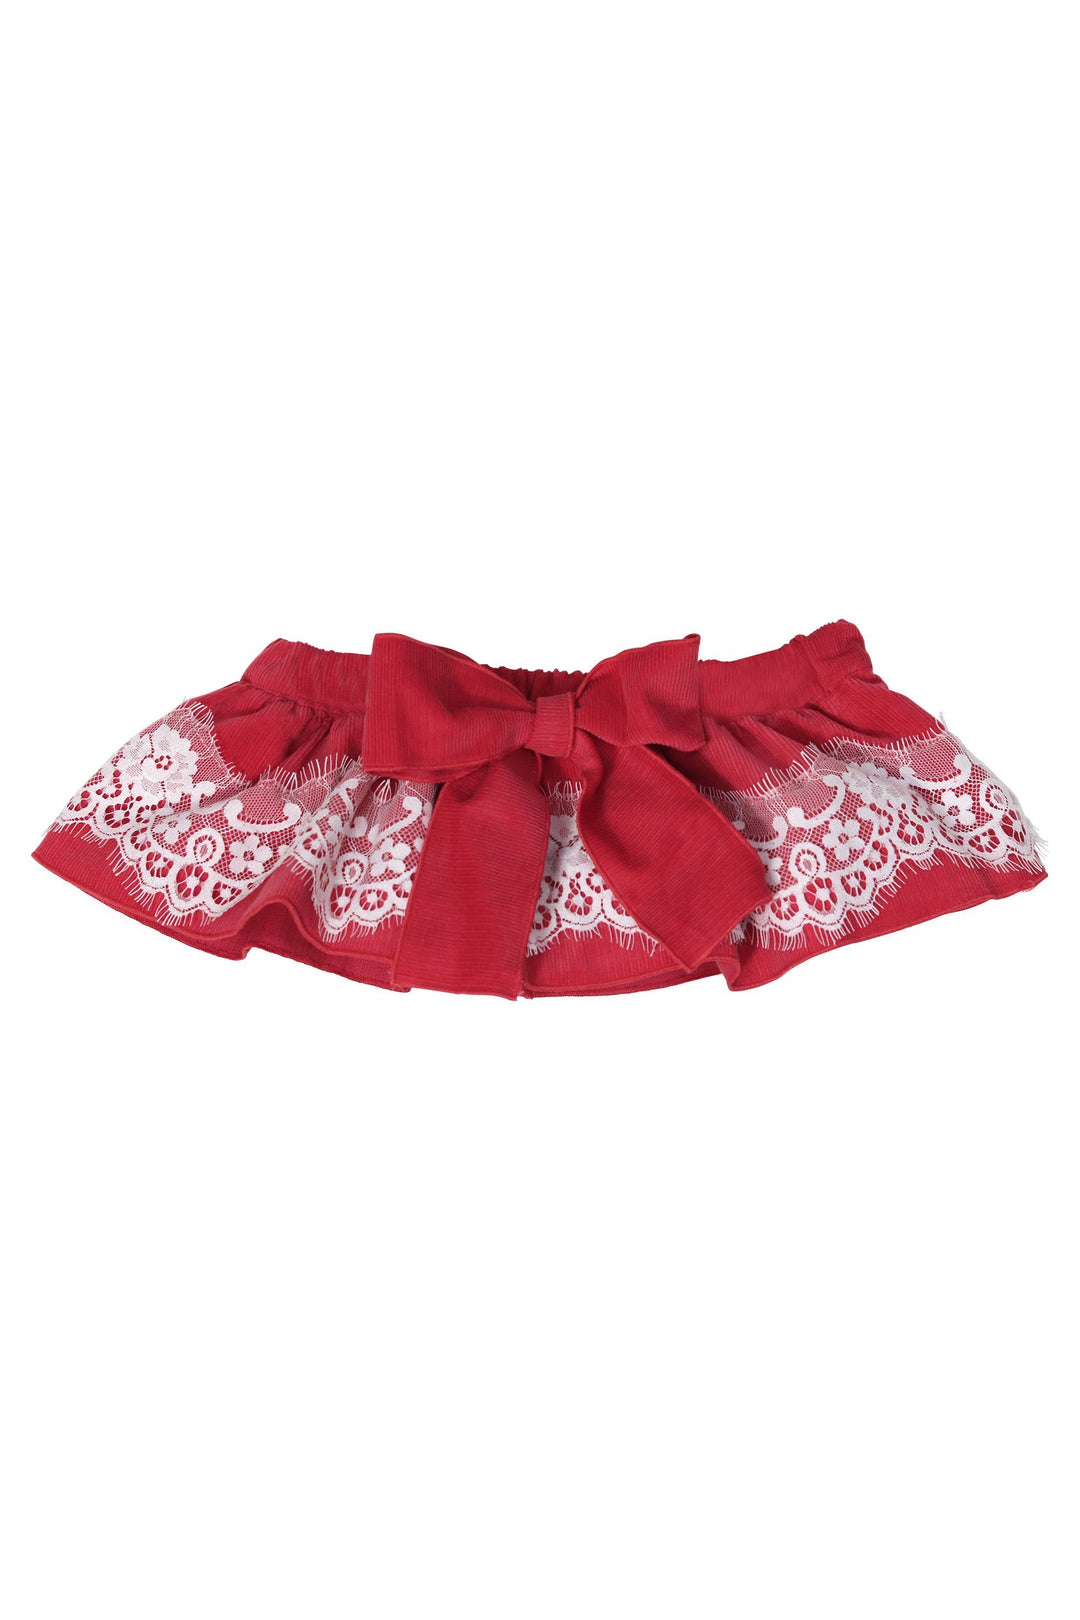 Phi "Hattie" Strawberry Red Cord Lace Bloomers | Millie and John